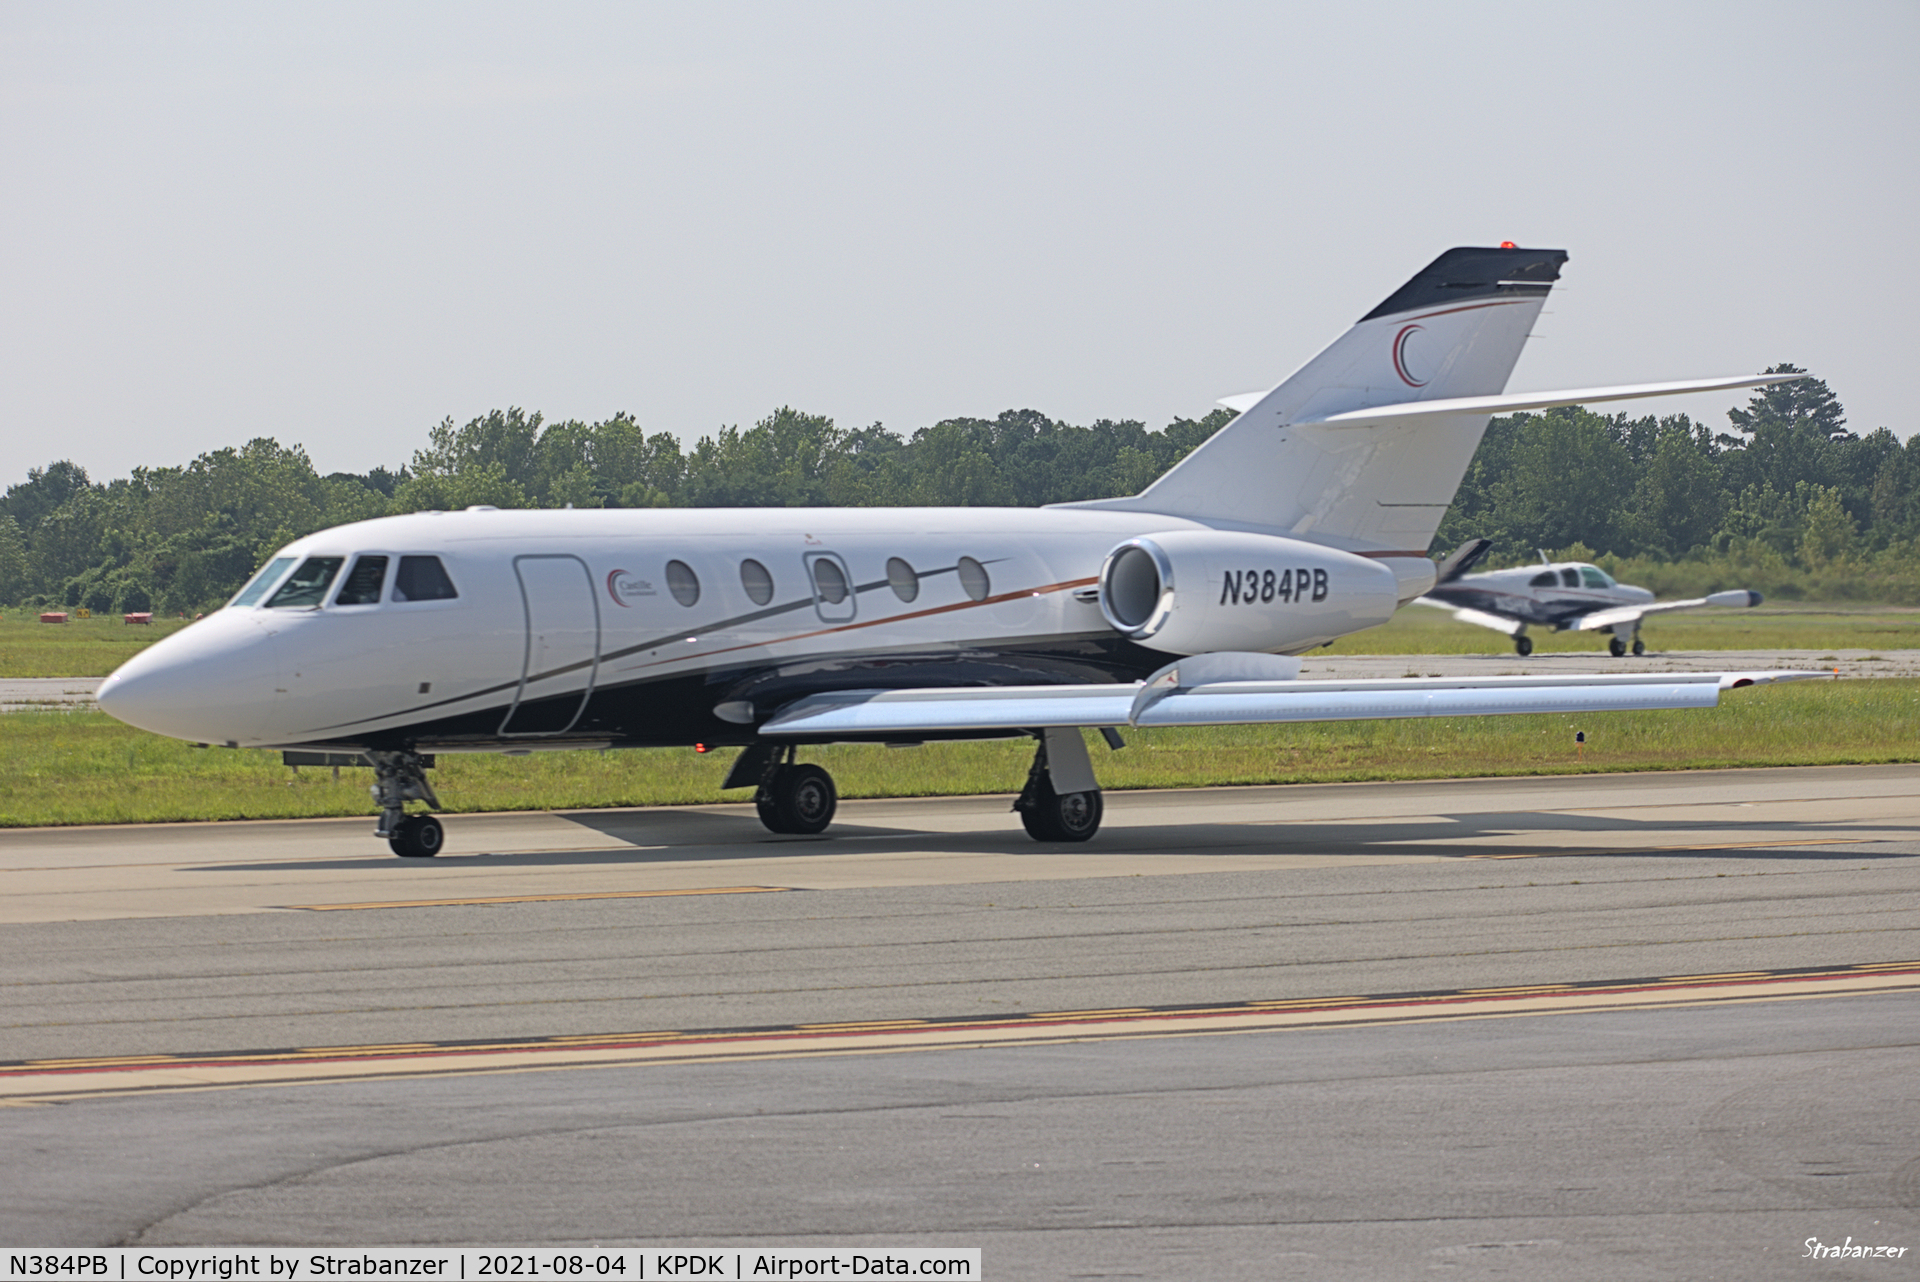 N384PB, 1980 Dassault Falcon (Mystere) 20 C/N 384, Taxiing in at KPDK